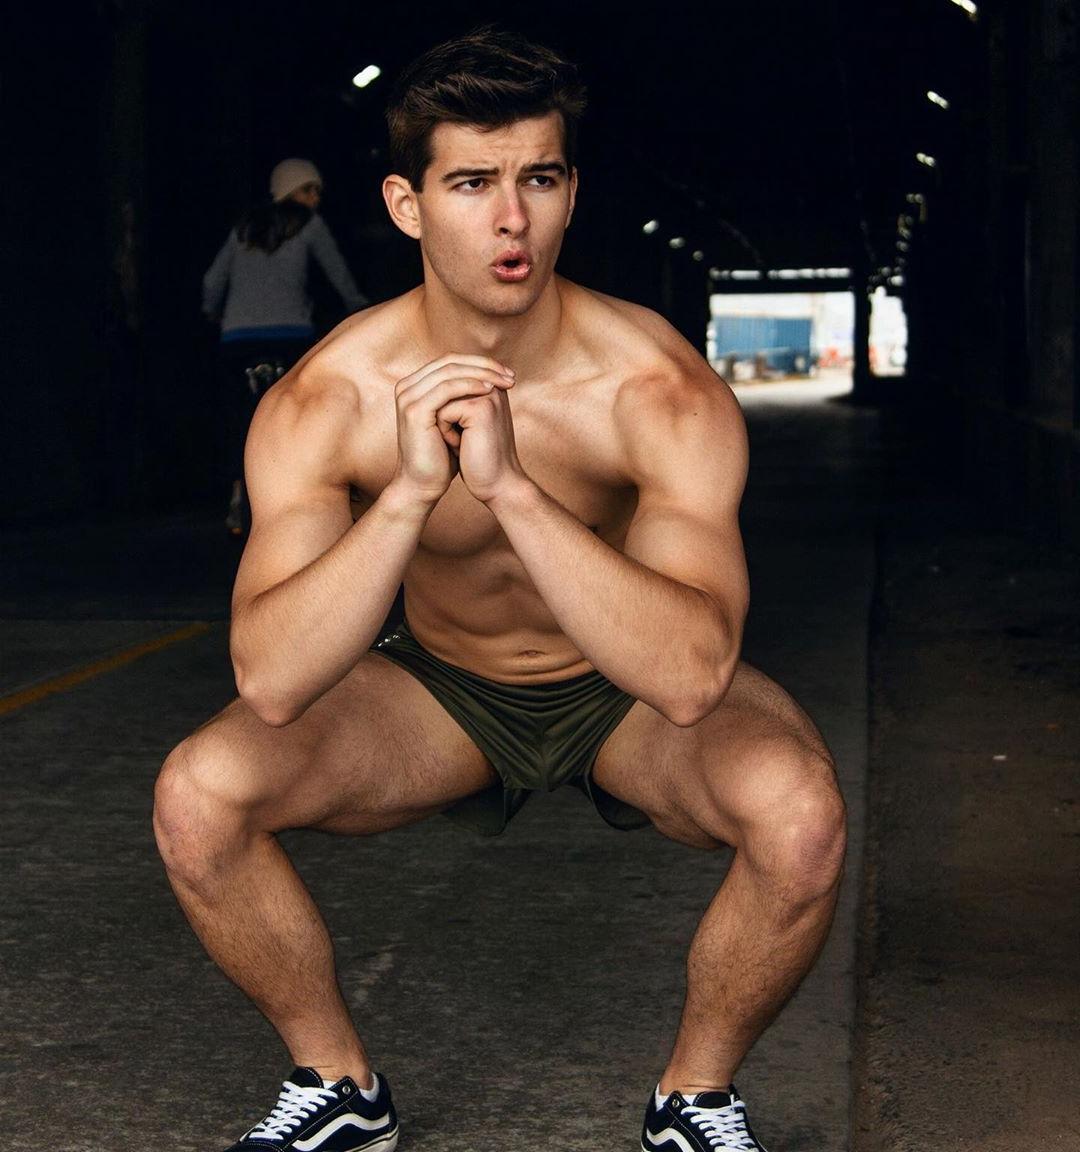 photo-bombed-sexy-fit-shirtless-dude-outdoor-workout